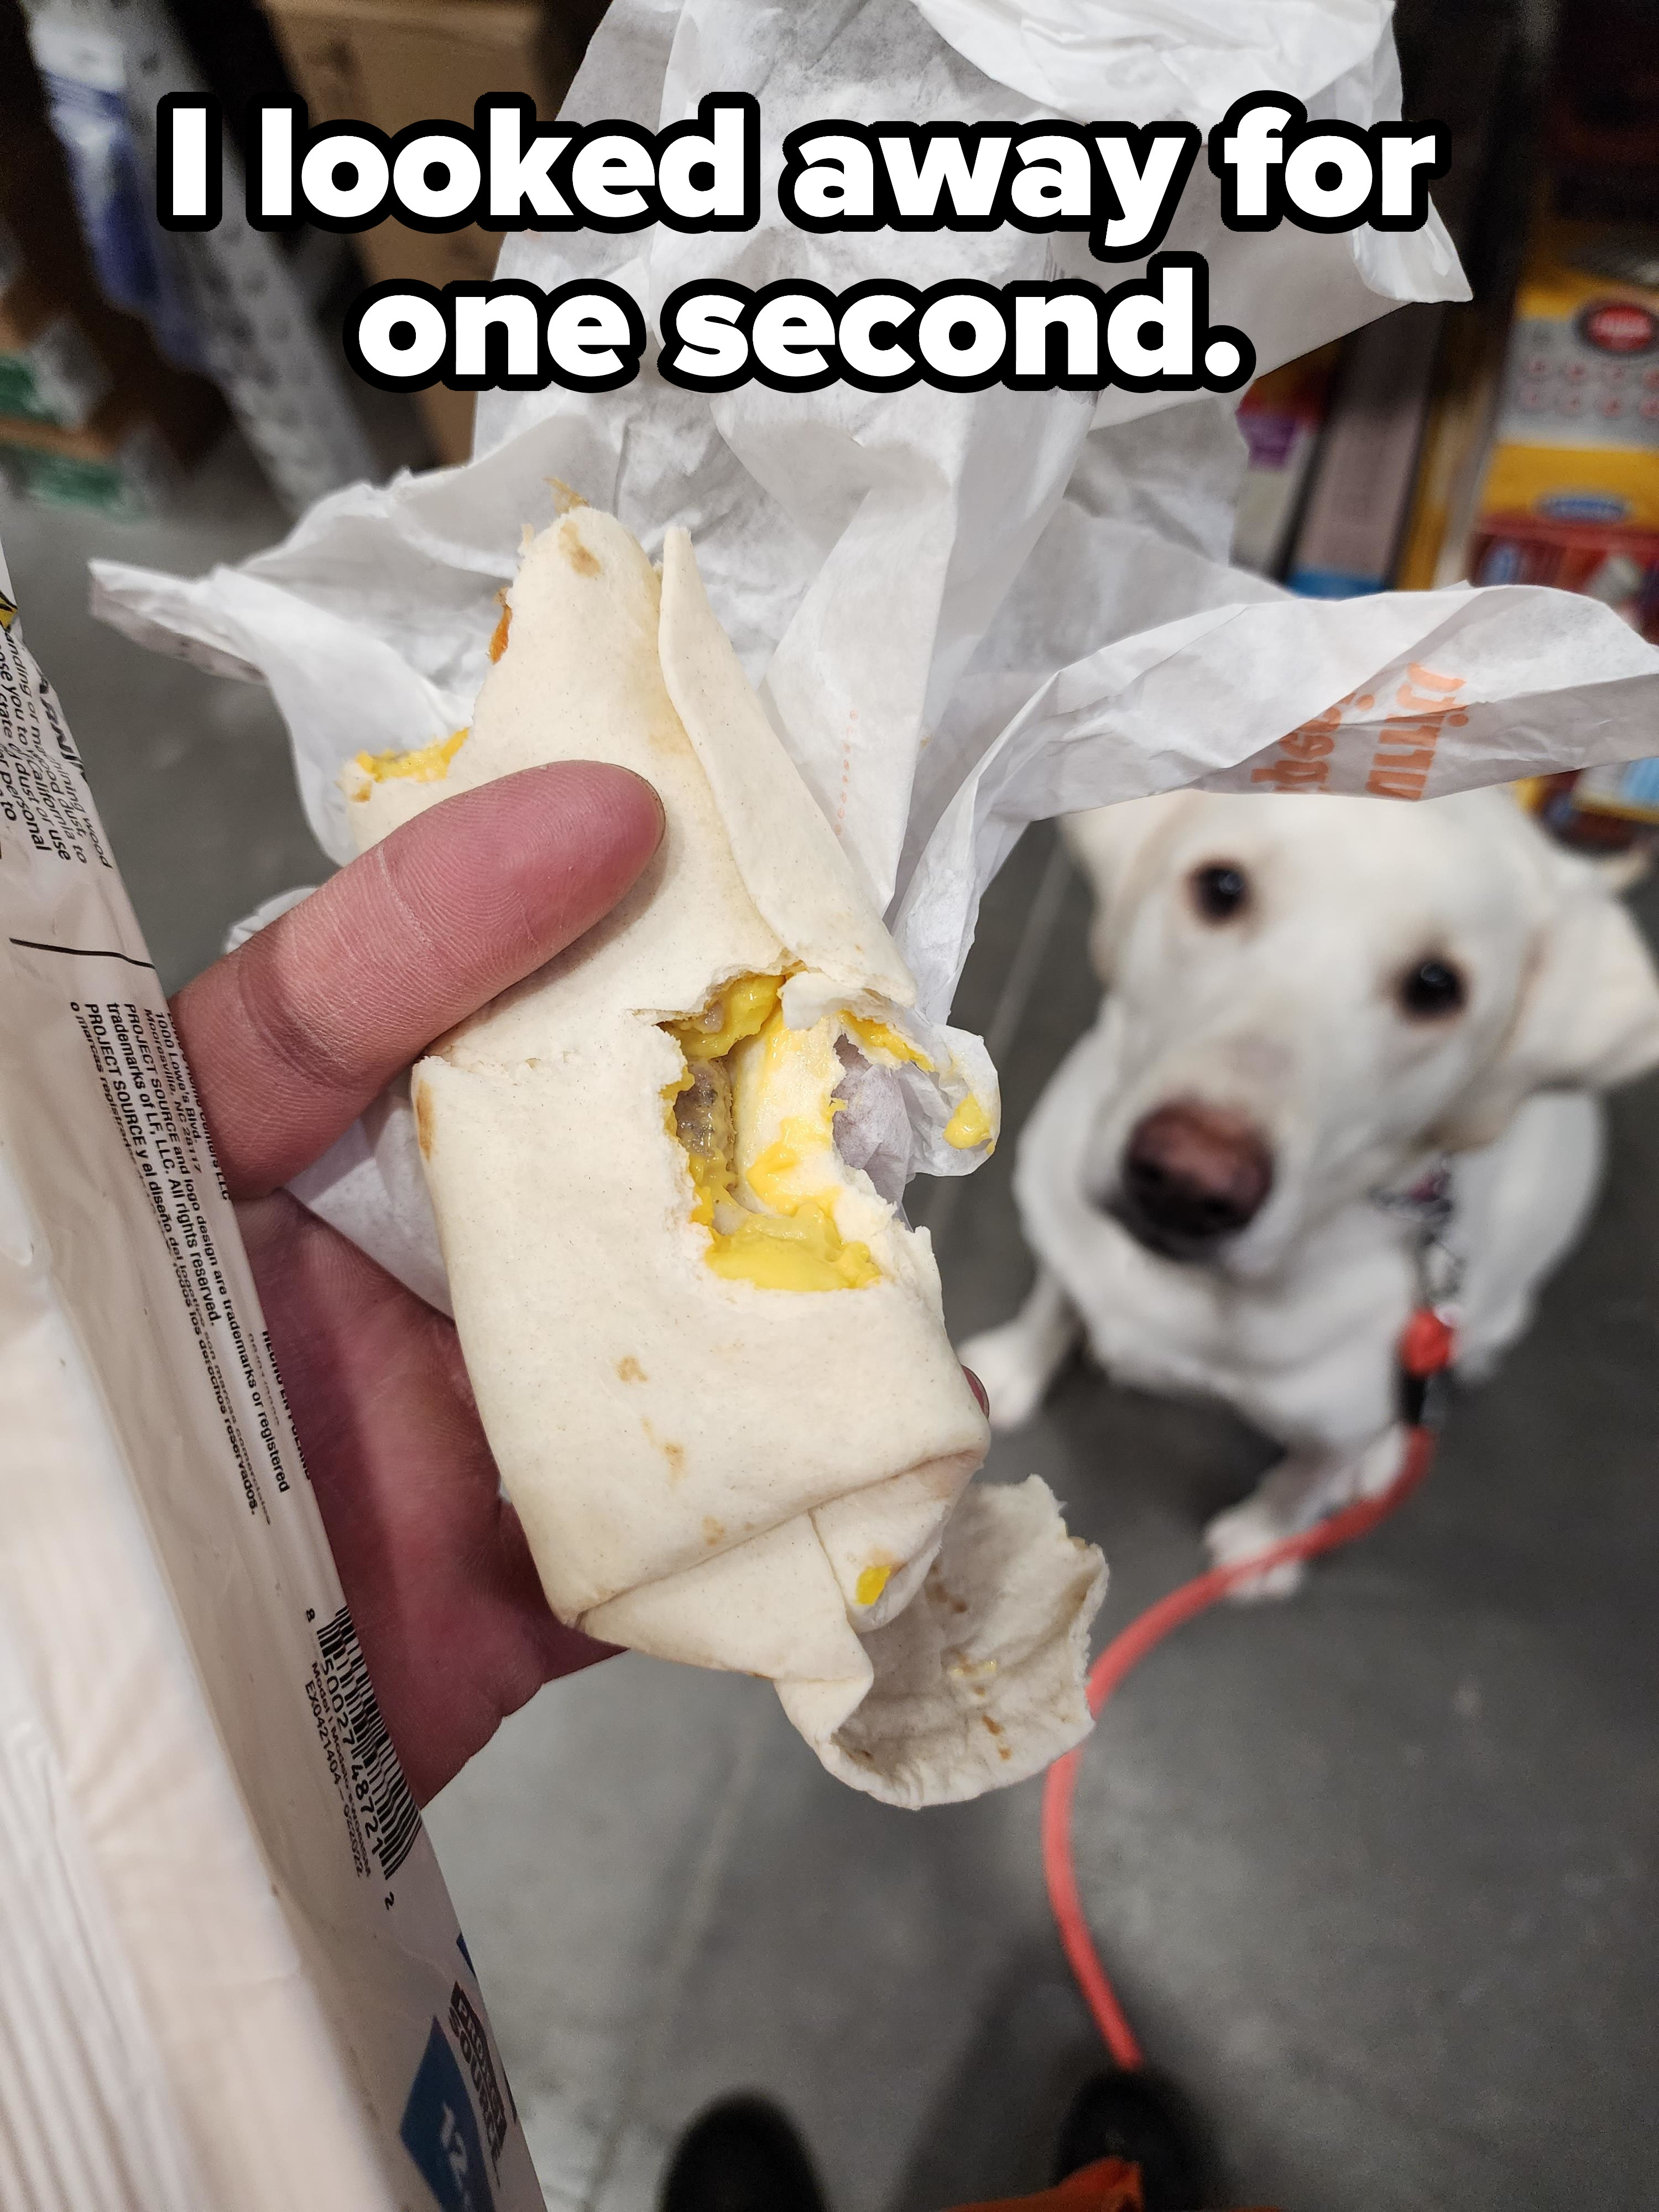 Dog who clearly ate part of a burrito someone was saving